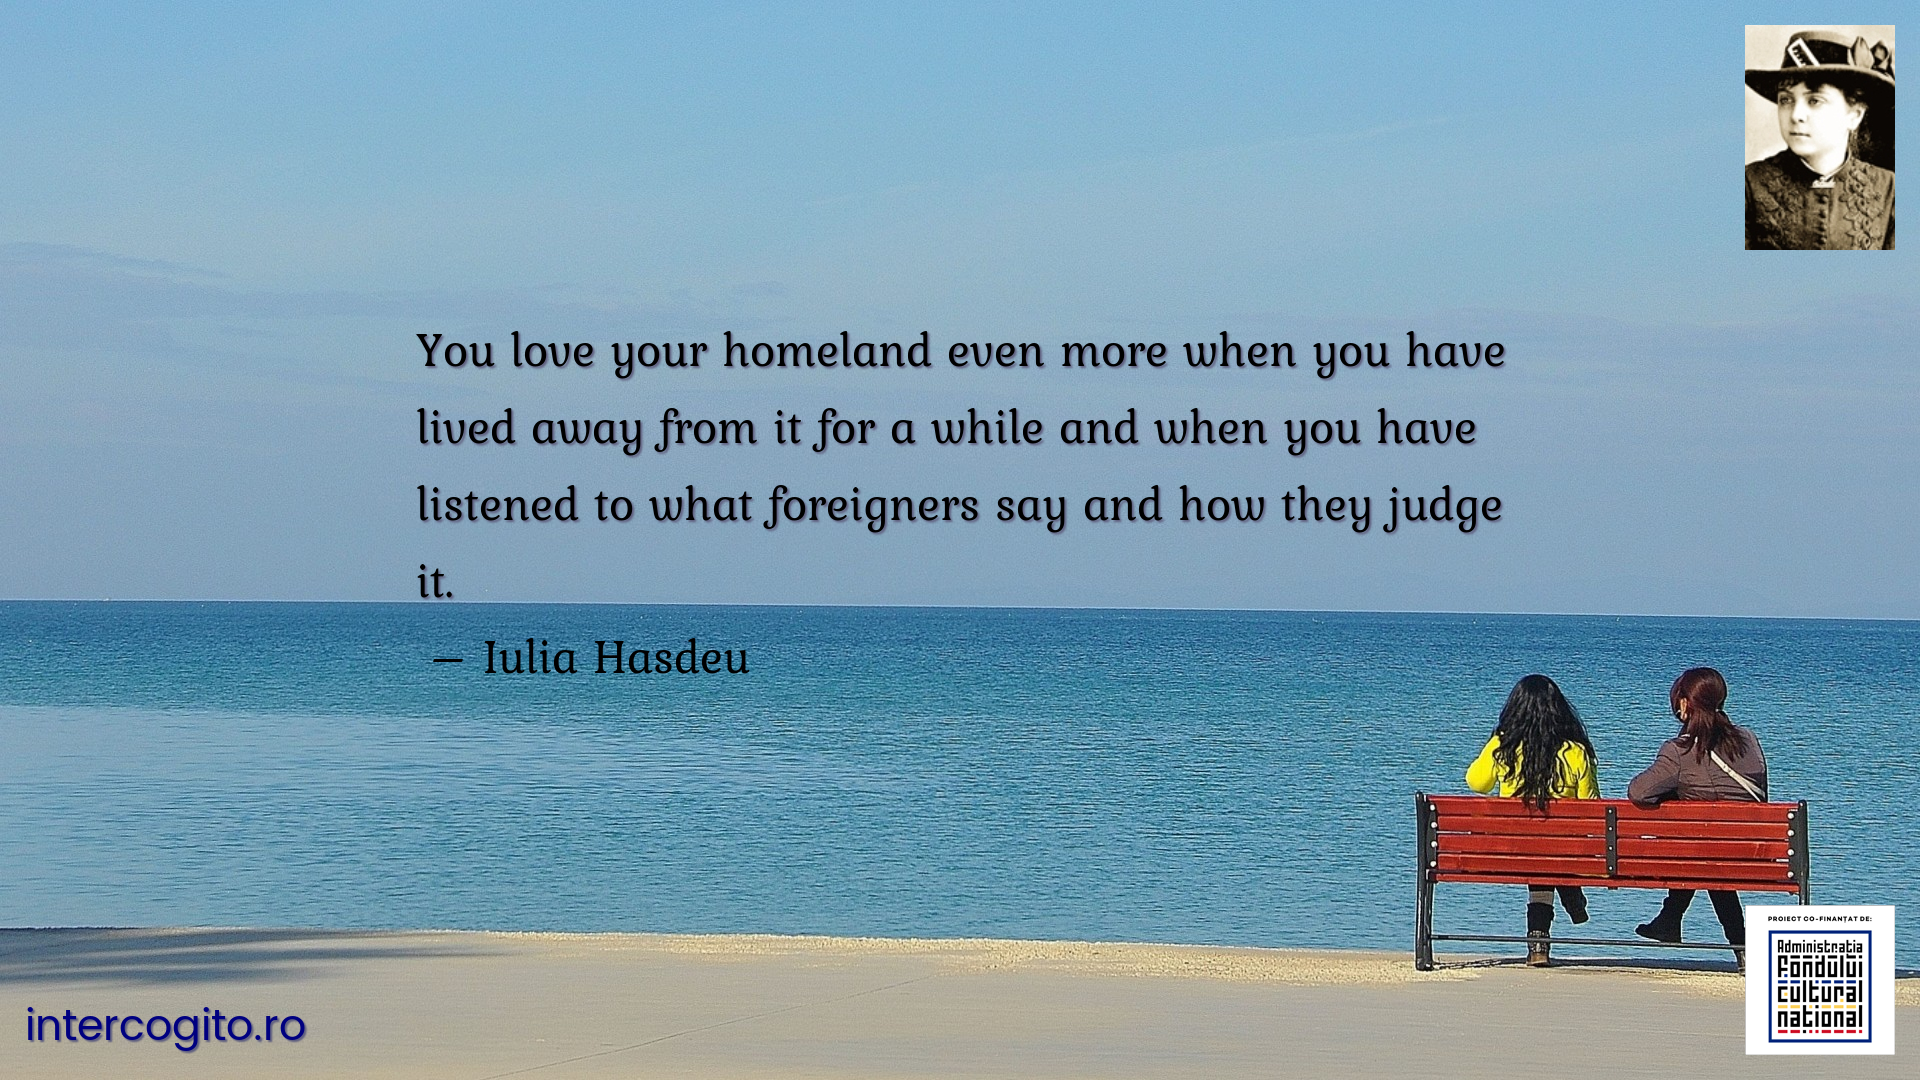 You love your homeland even more when you have lived away from it for a while and when you have listened to what foreigners say and how they judge it.